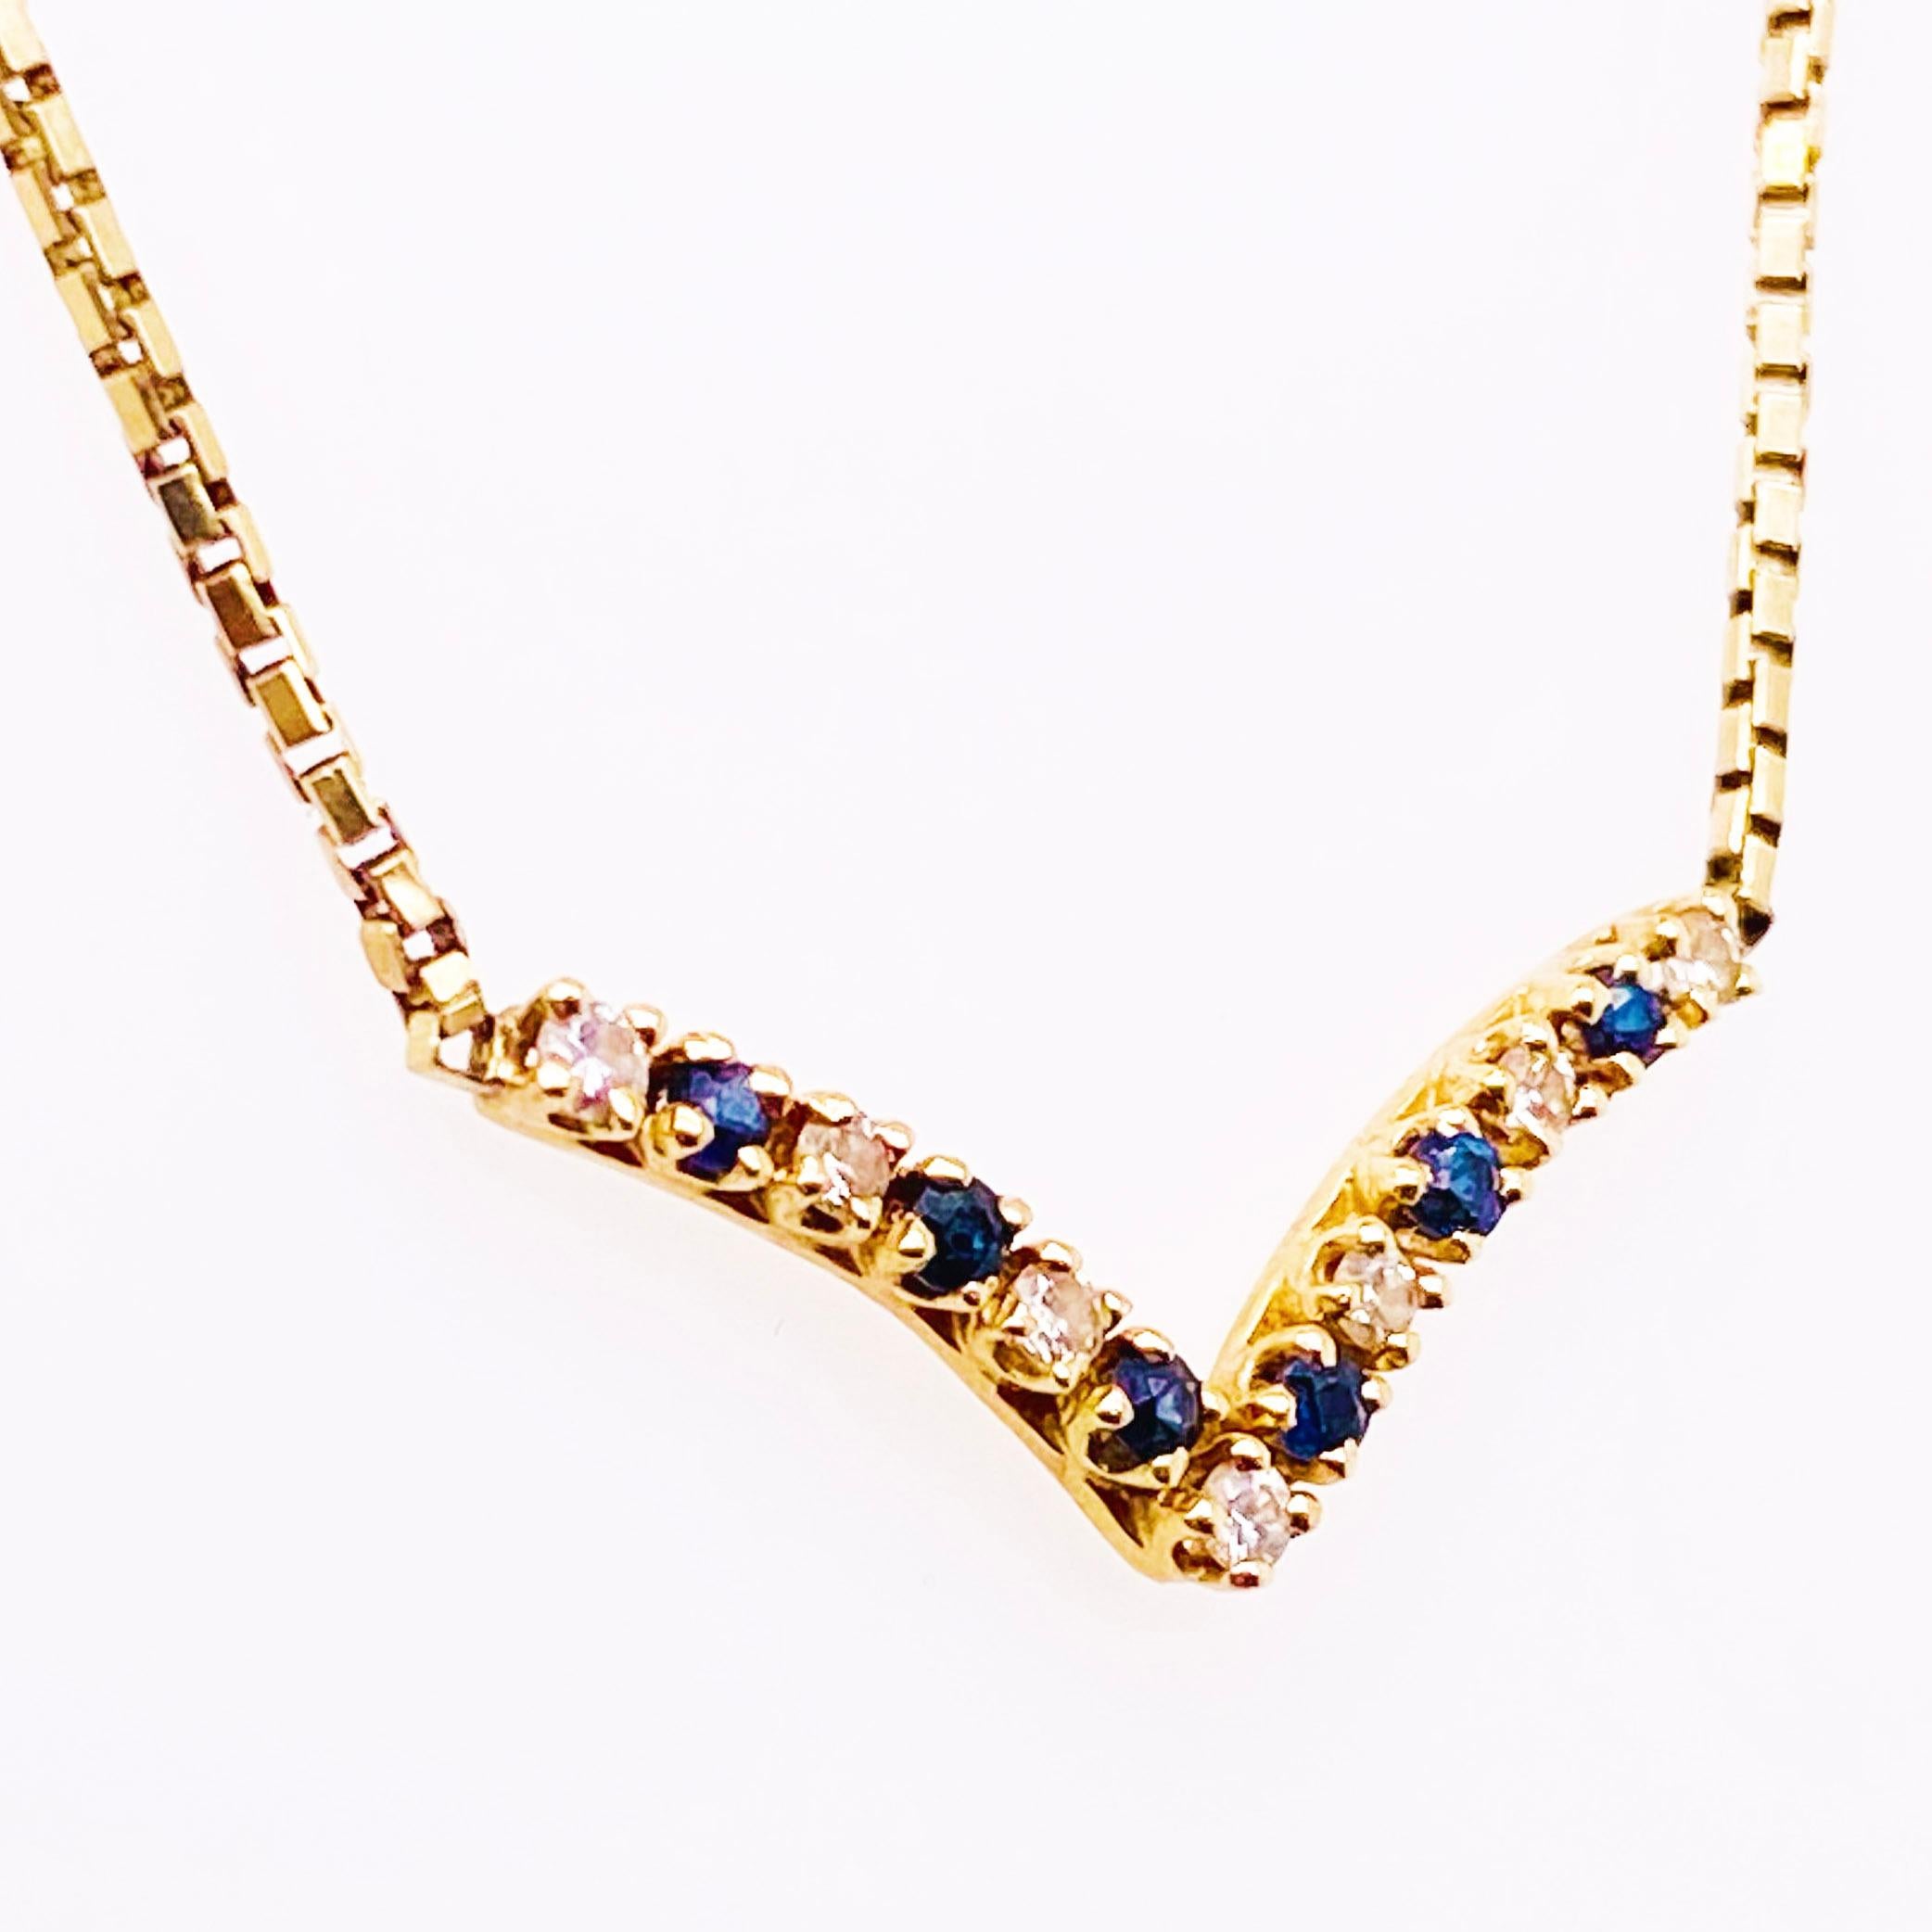 The chevron shape is the 2020 favorite necklace!!!  This blue sapphire and white diamond V necklace is stunningly beautiful! This 14k plumb necklace is very modern yet classic! This necklace is classy enough to pair easily with formal wear, yet is